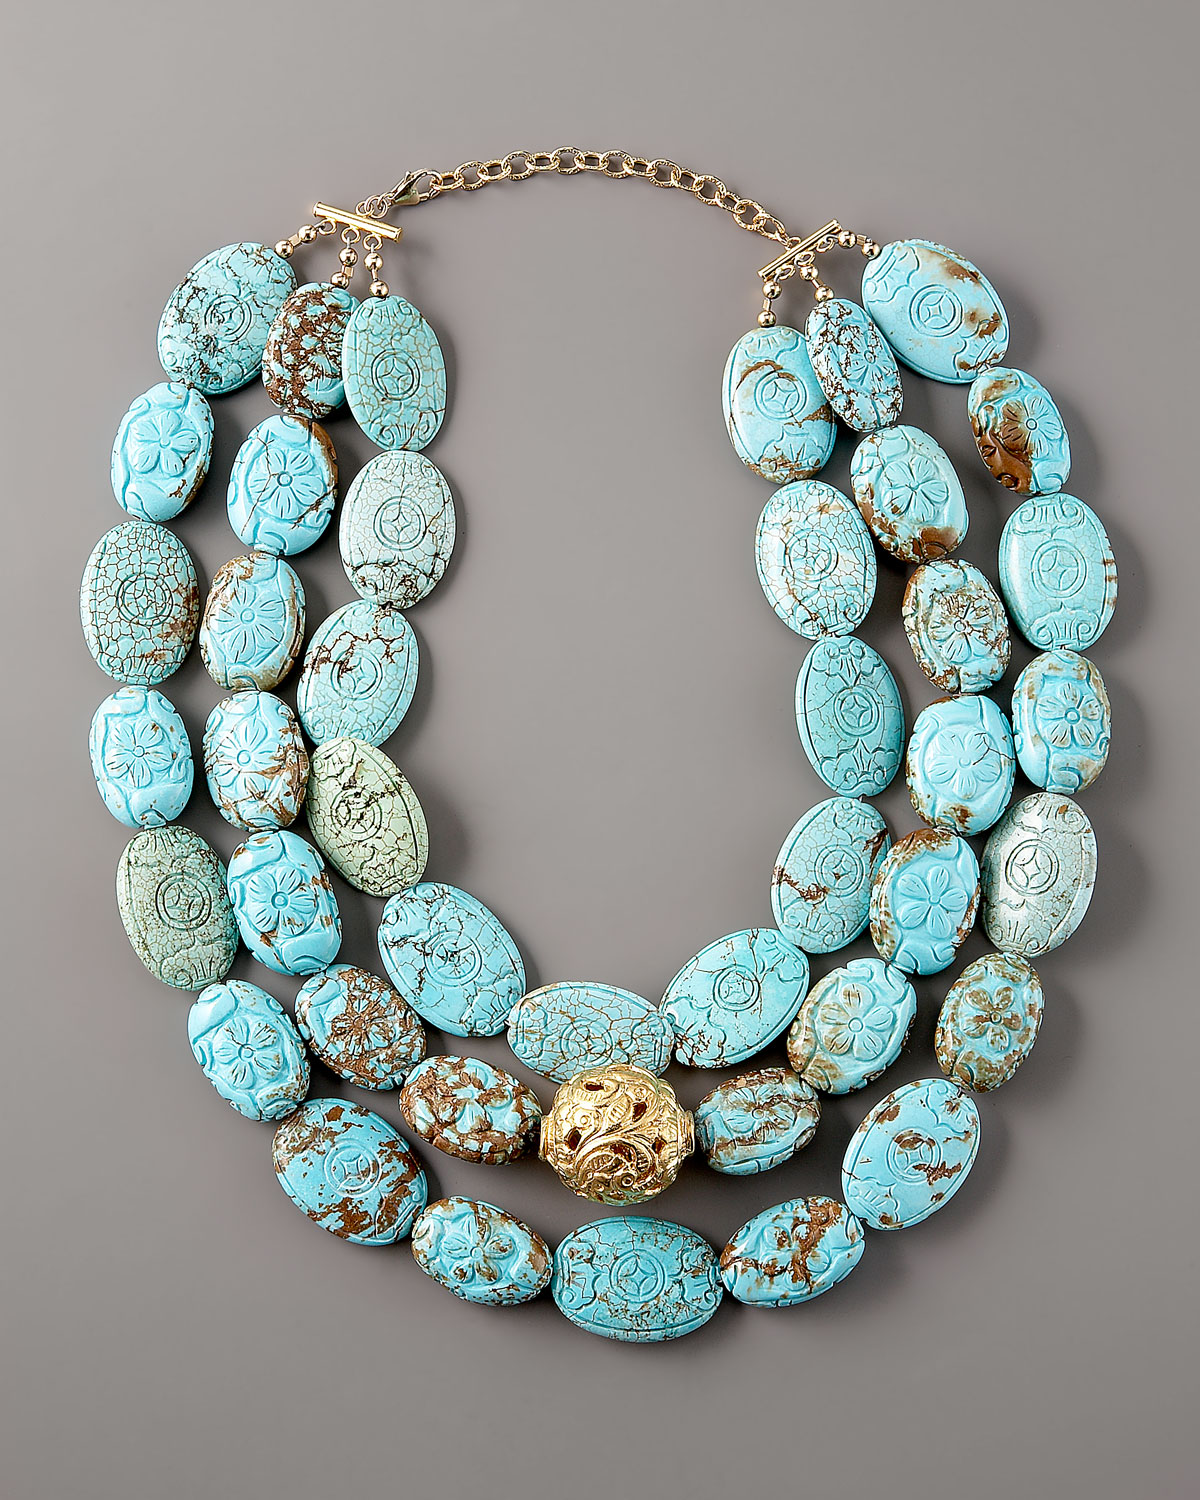 Devon Leigh Three-strand Turquoise Necklace in Blue - Lyst